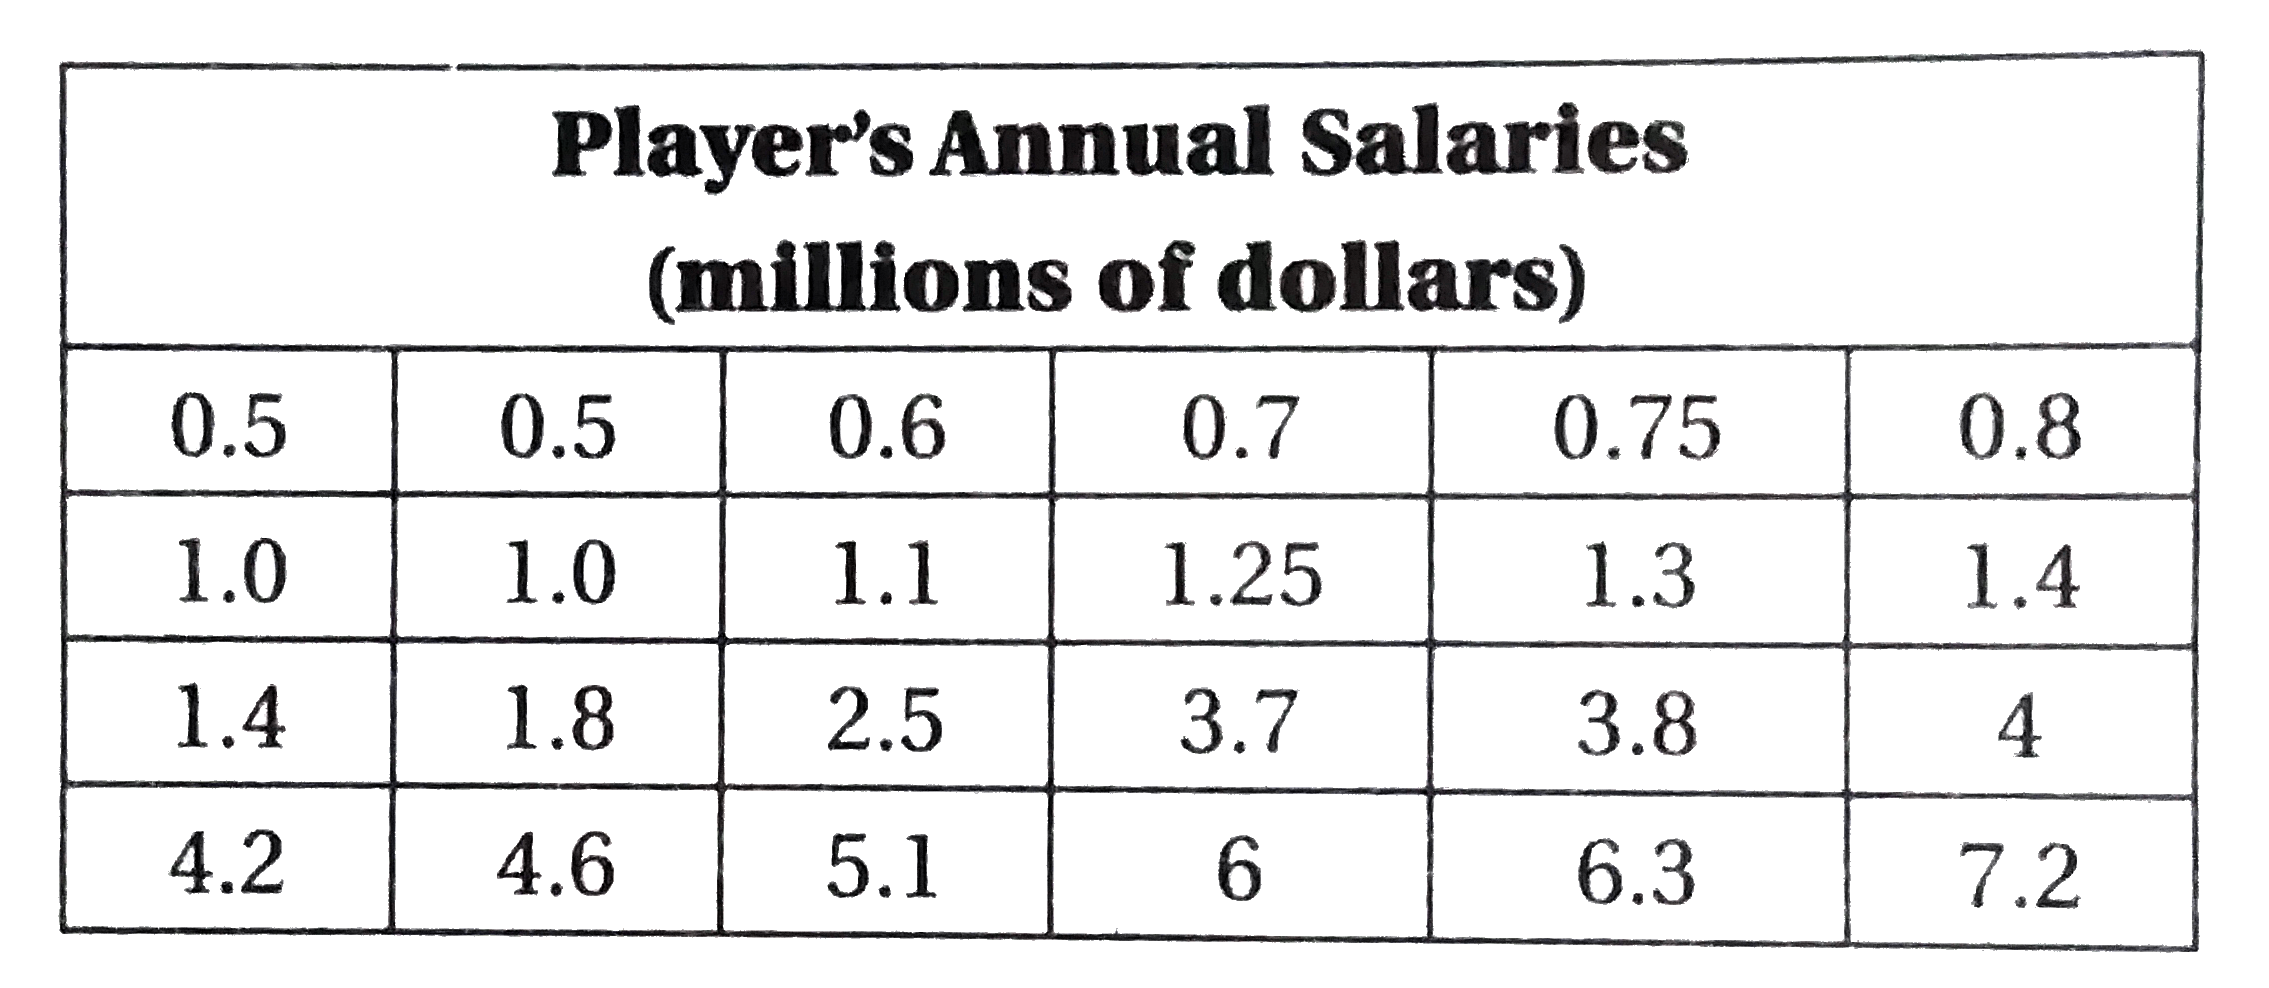 21-22 The table above shows the annual salaries for the 24 members of a professional sports team in terms of millions of dollars.   Q.The team signs an additional player to a contract with an annual salary of 7.5 million dollars per year, which brings the sum of the salaries of the 25 players to 69 million dollars. By what amount, in dollars, does the mean increase?